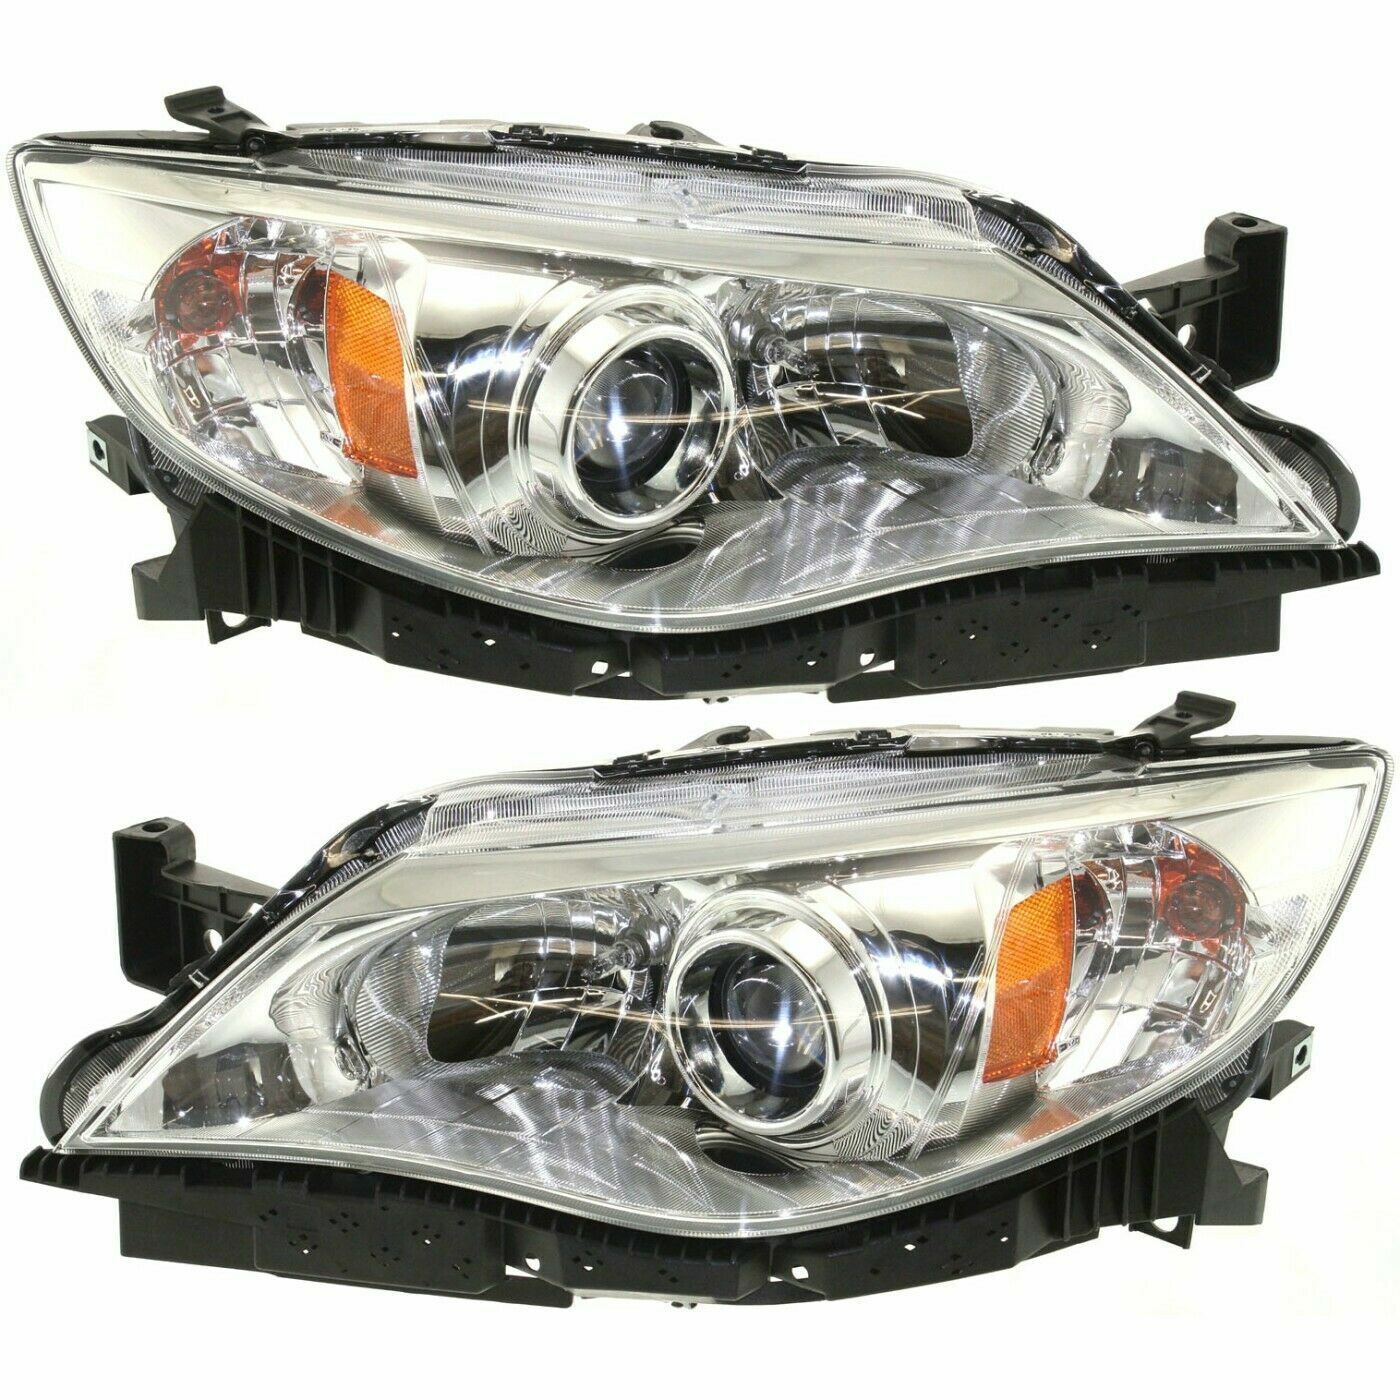 FIT FOR SB IMPREZA / OUTBACK 2008 2009 2010 2011 HEADLIGHTS CHROME RIGHT & LEFT 